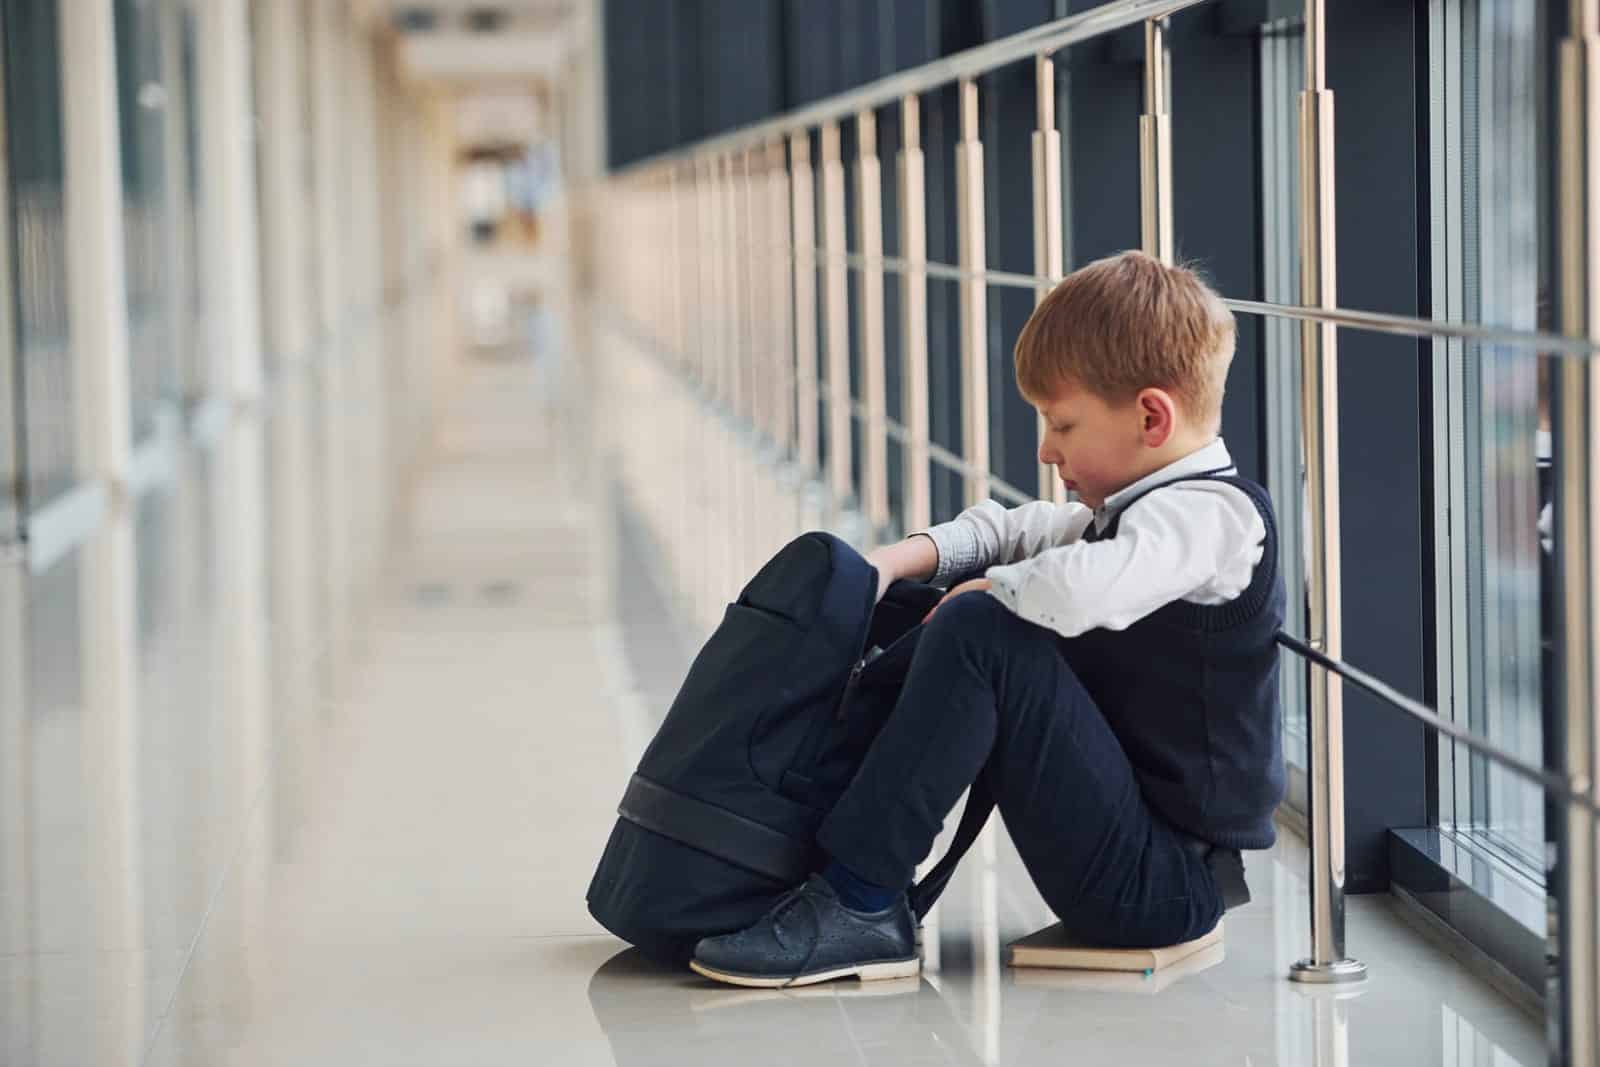 A young boy in a school uniform sits on the floor in a long hallway, looking into his black backpack.